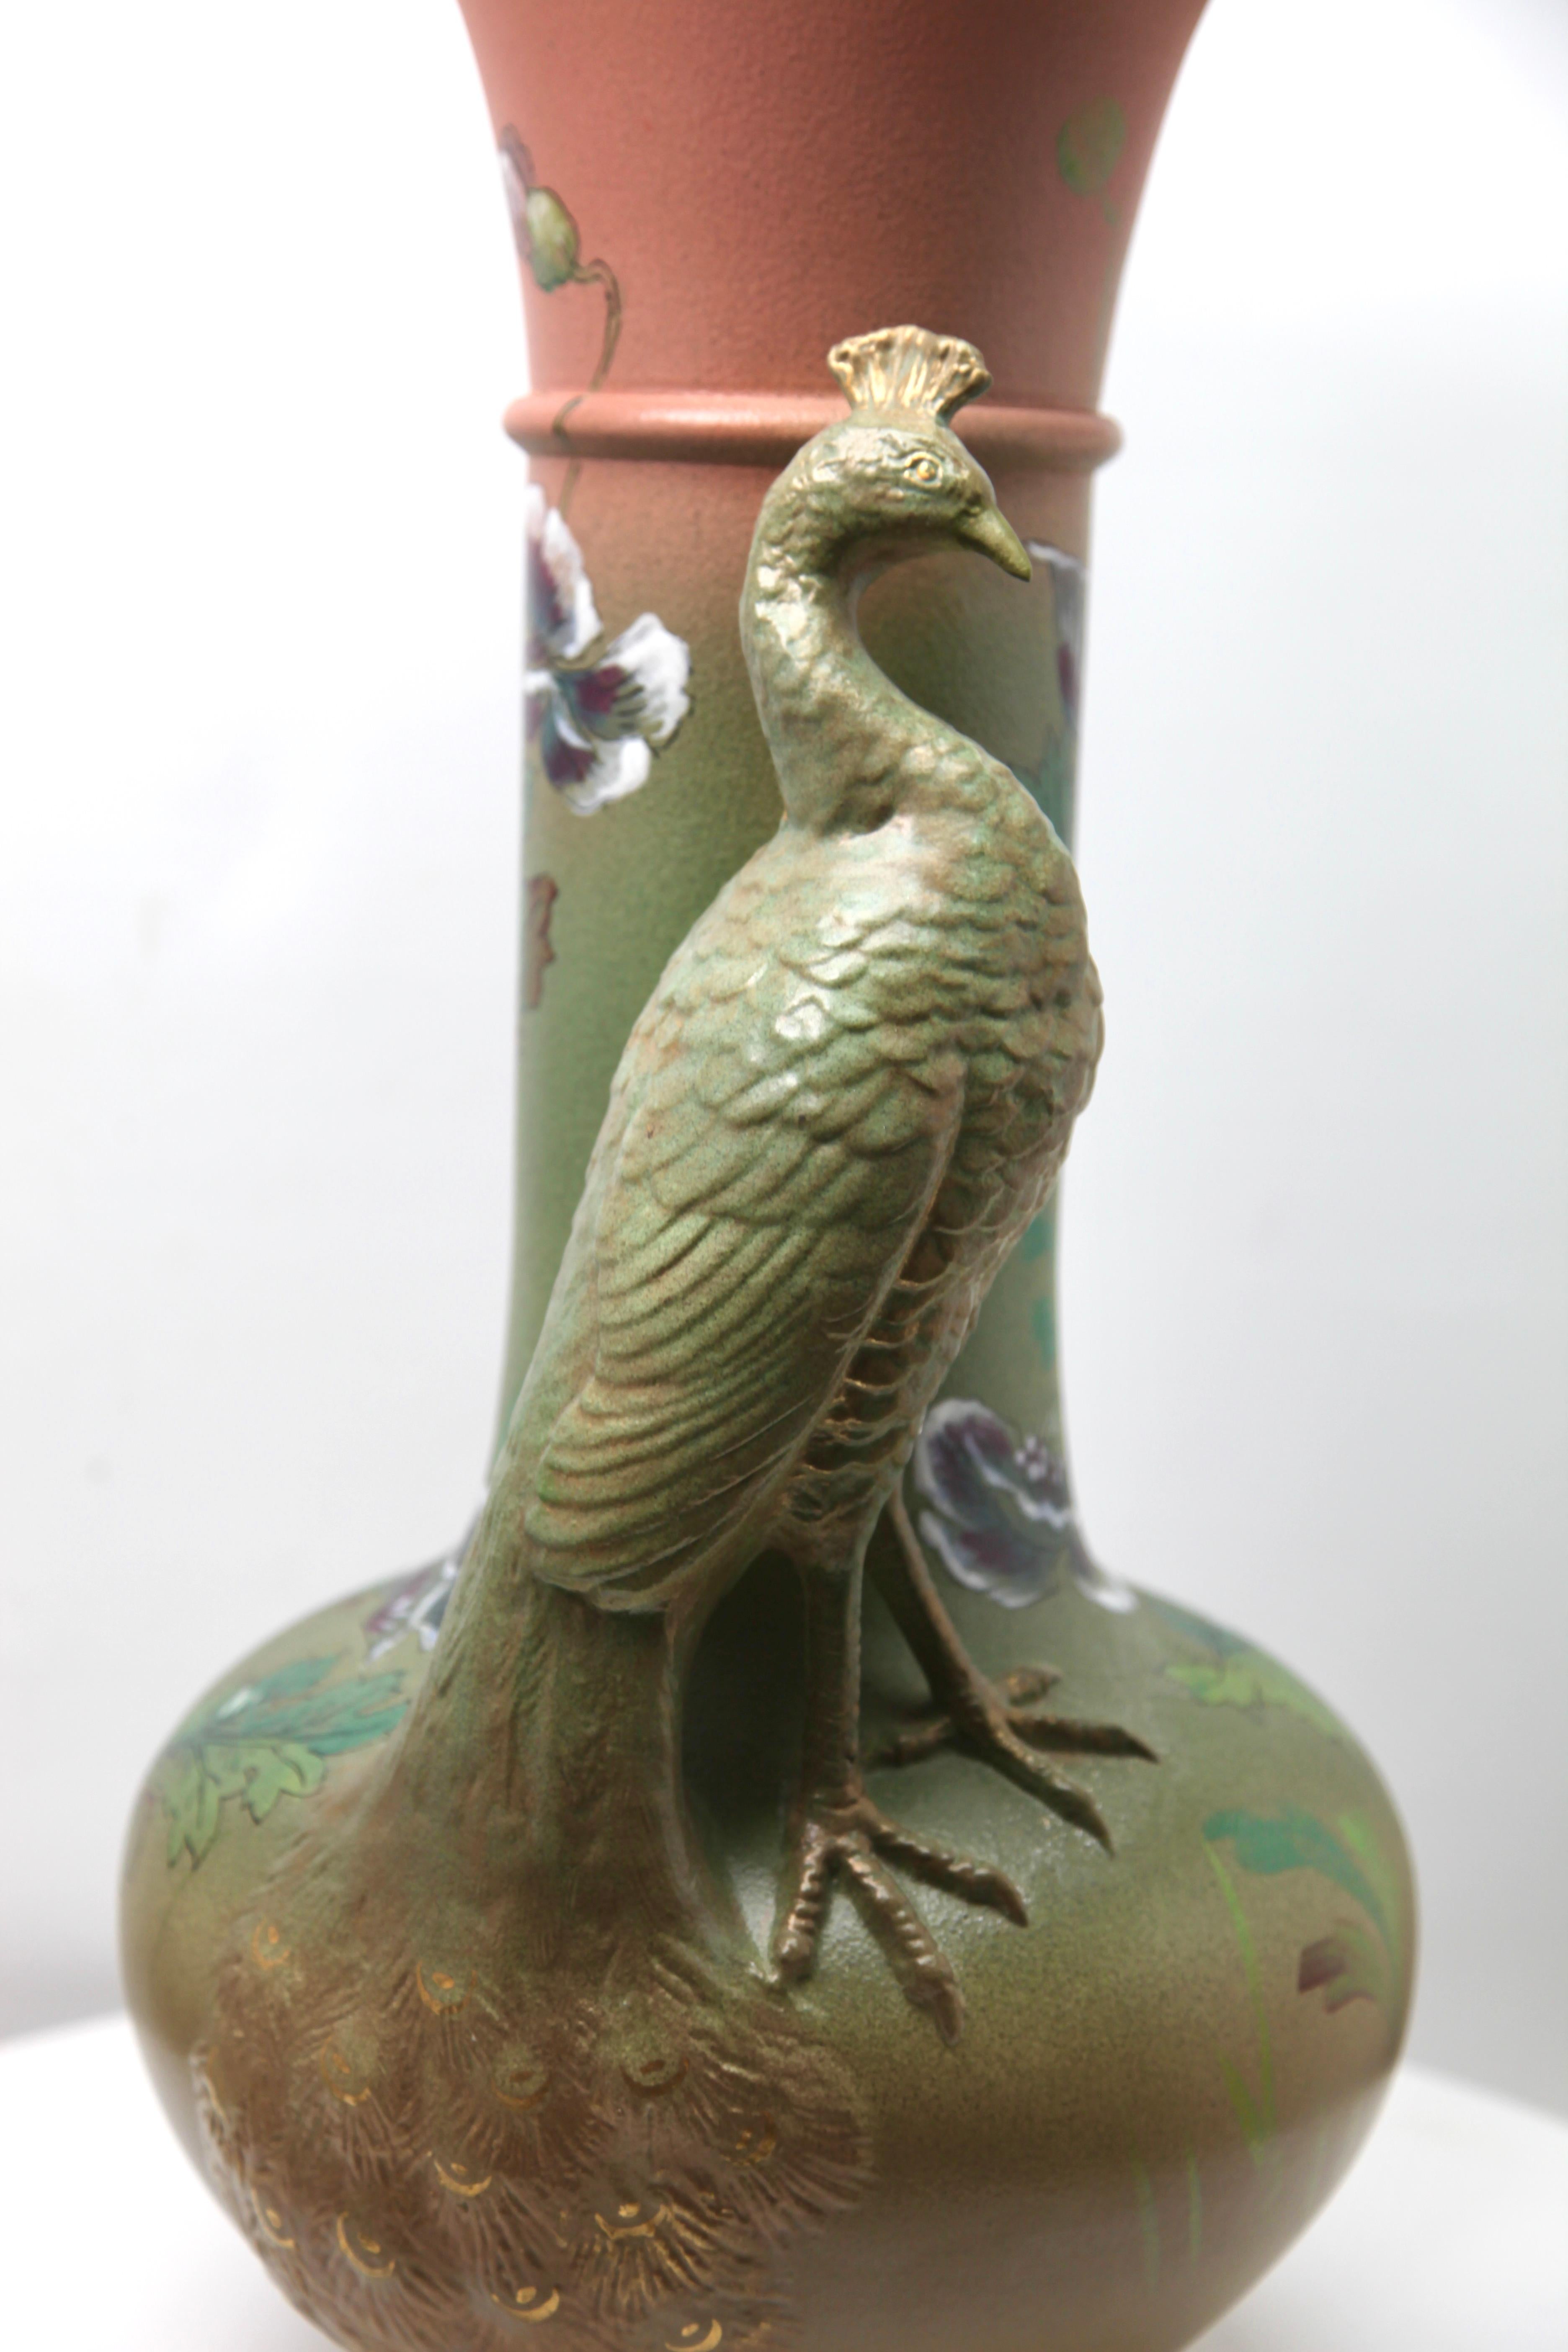 This dramatic and unusual sculpted vase has a very long neck and a very detailed portrayal of a peacock which has been separately modelled and applied to the basic vessel. The long neck suggests that it may have been intended to hold peacock